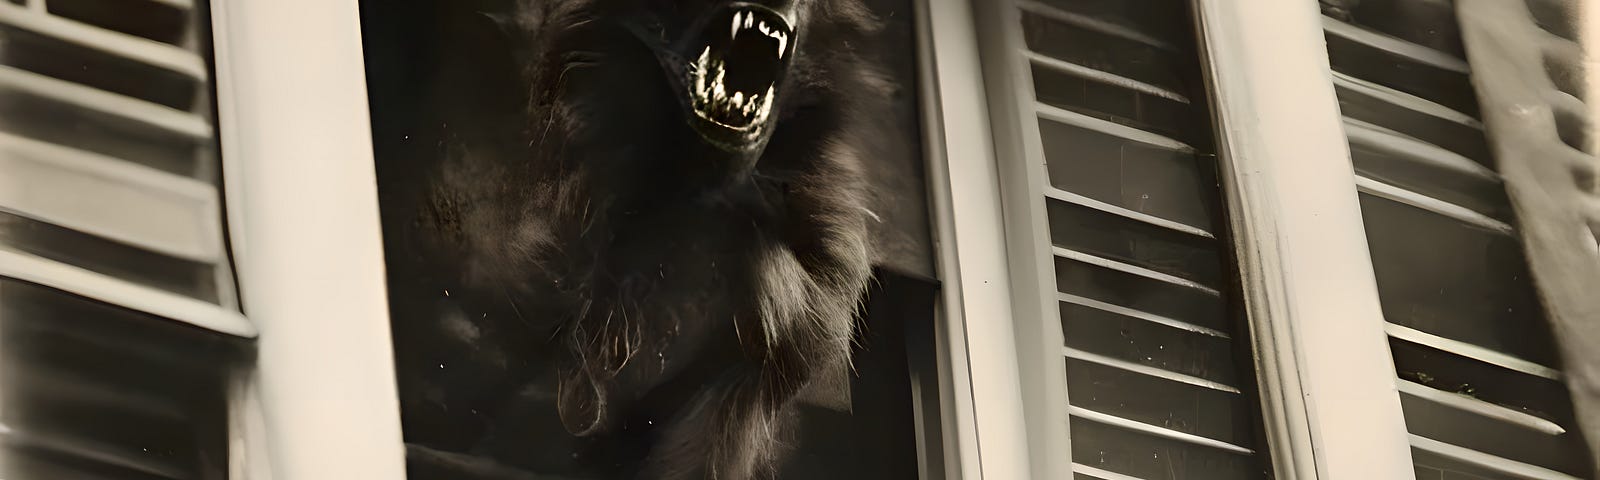 A werewolf snarling and angry crashes through a window.